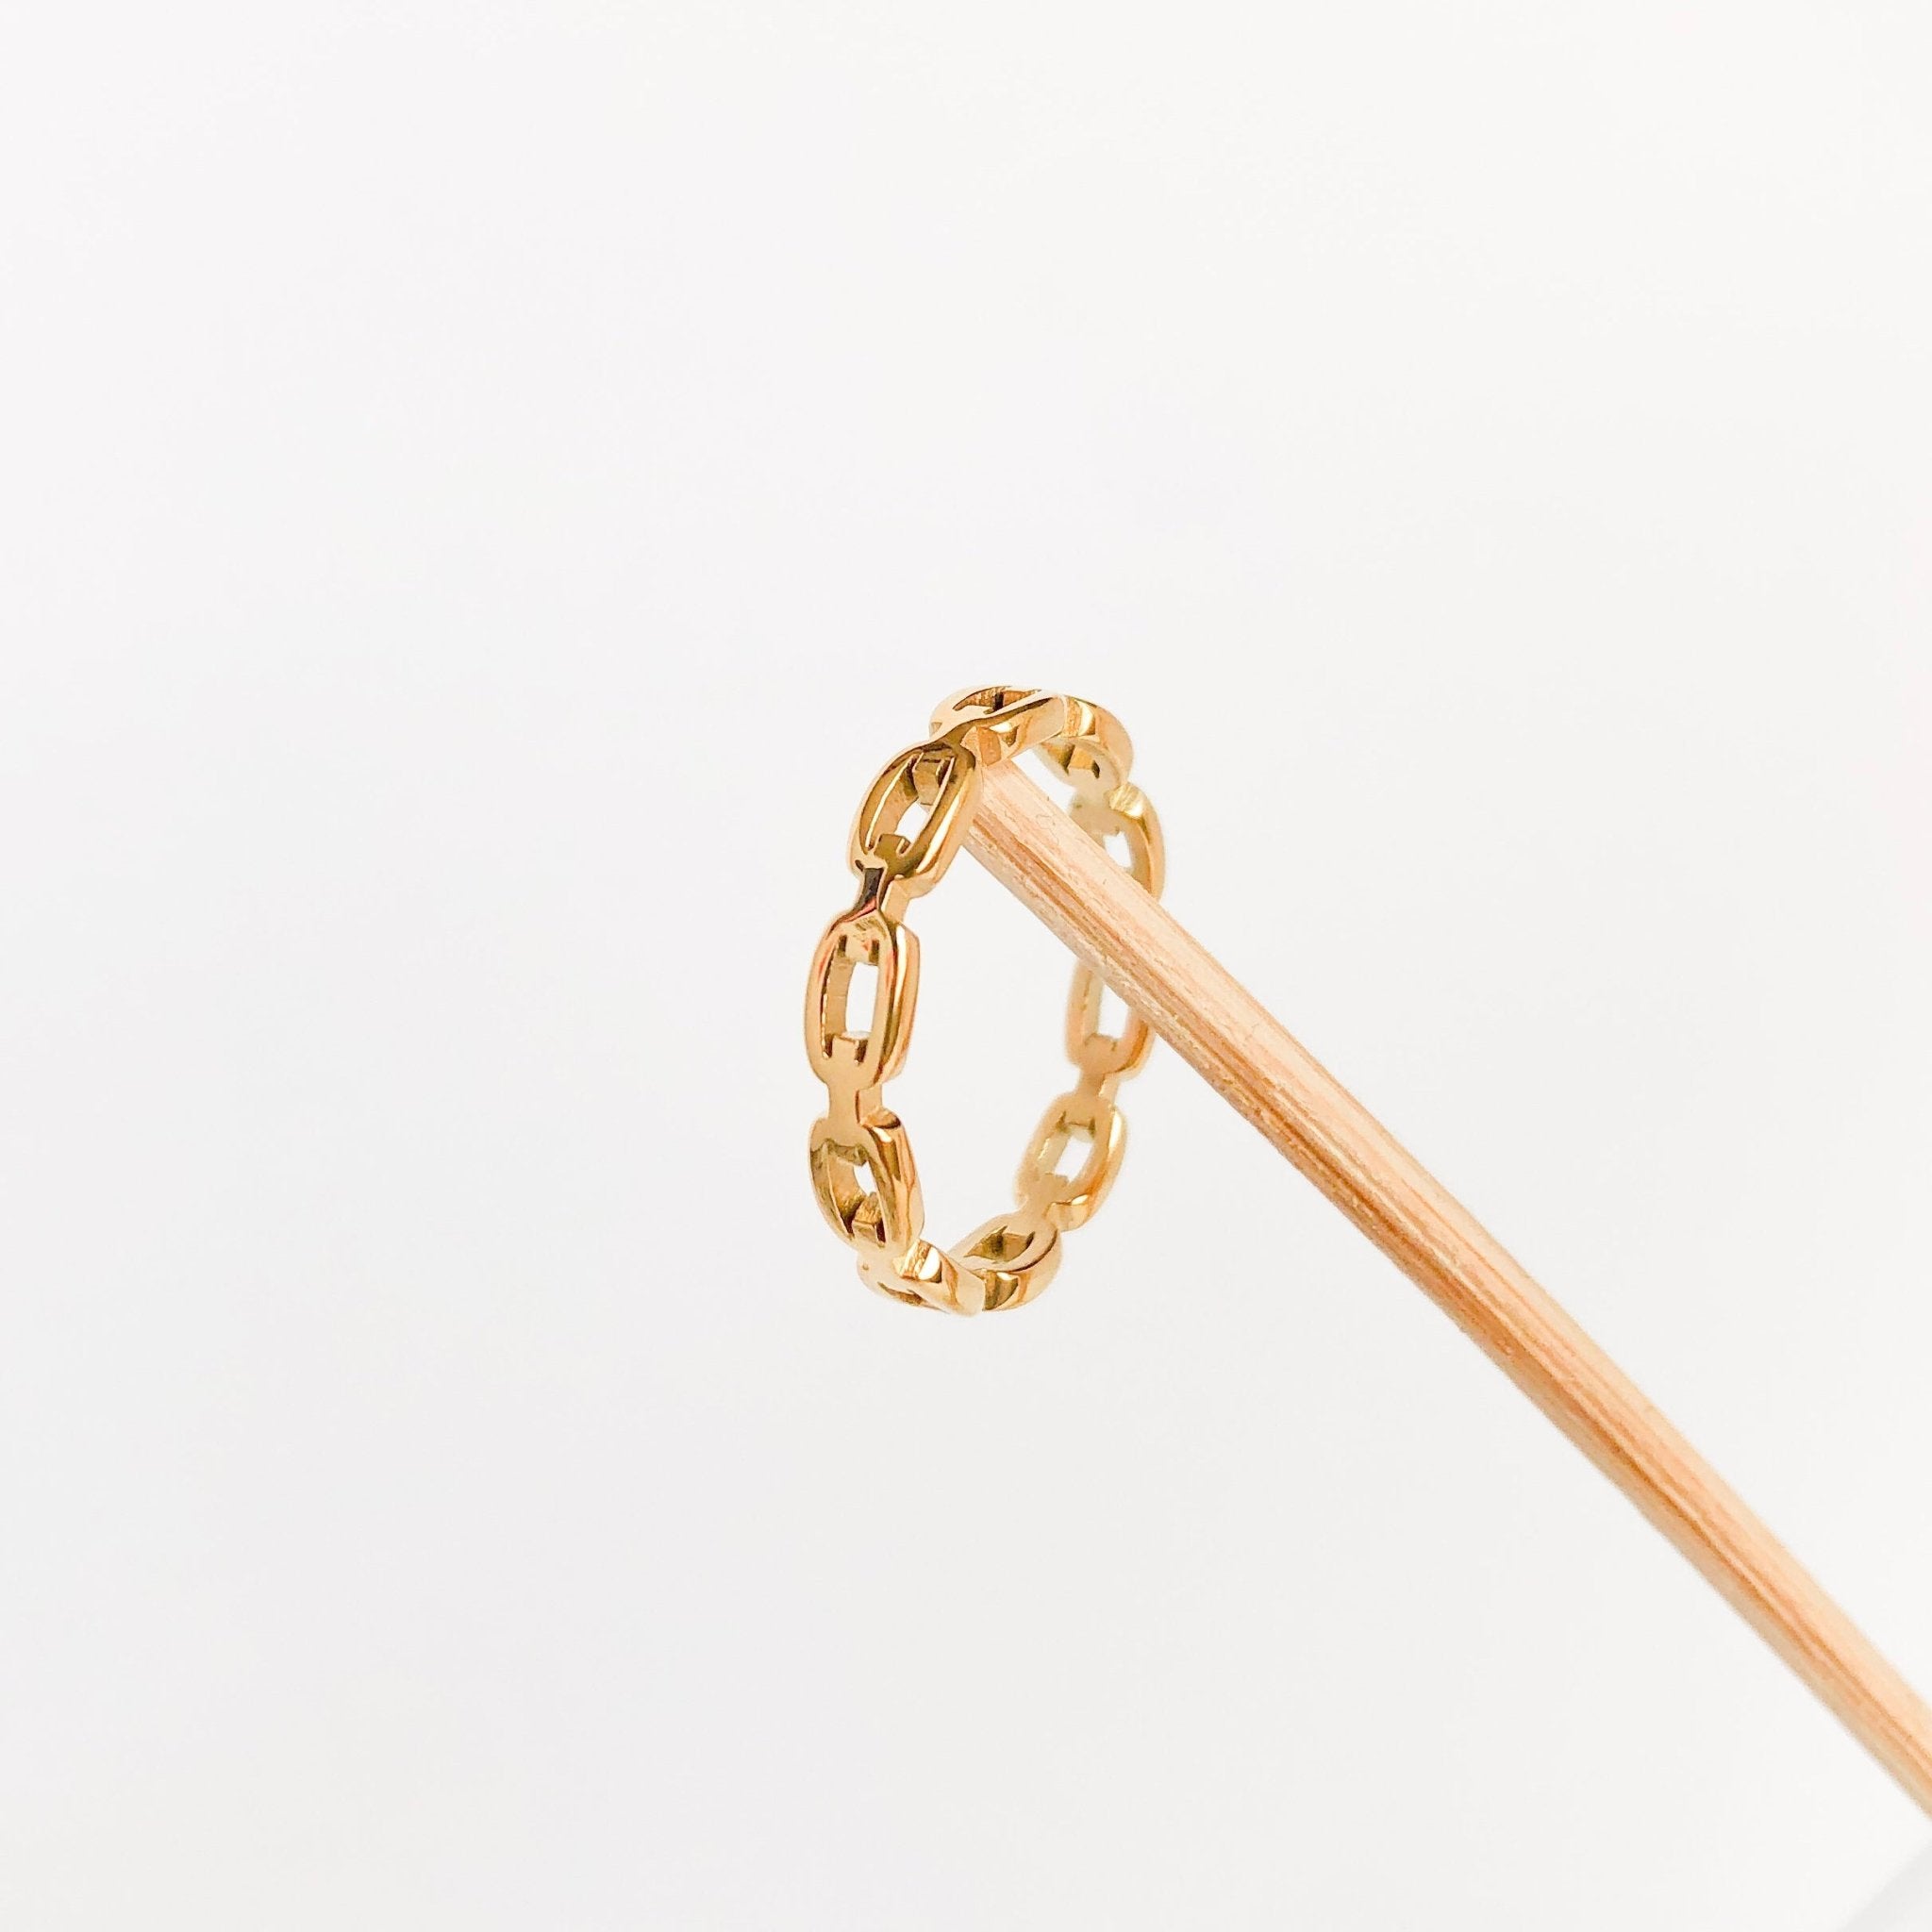 Layla Ring in Gold - Flaire & Co.